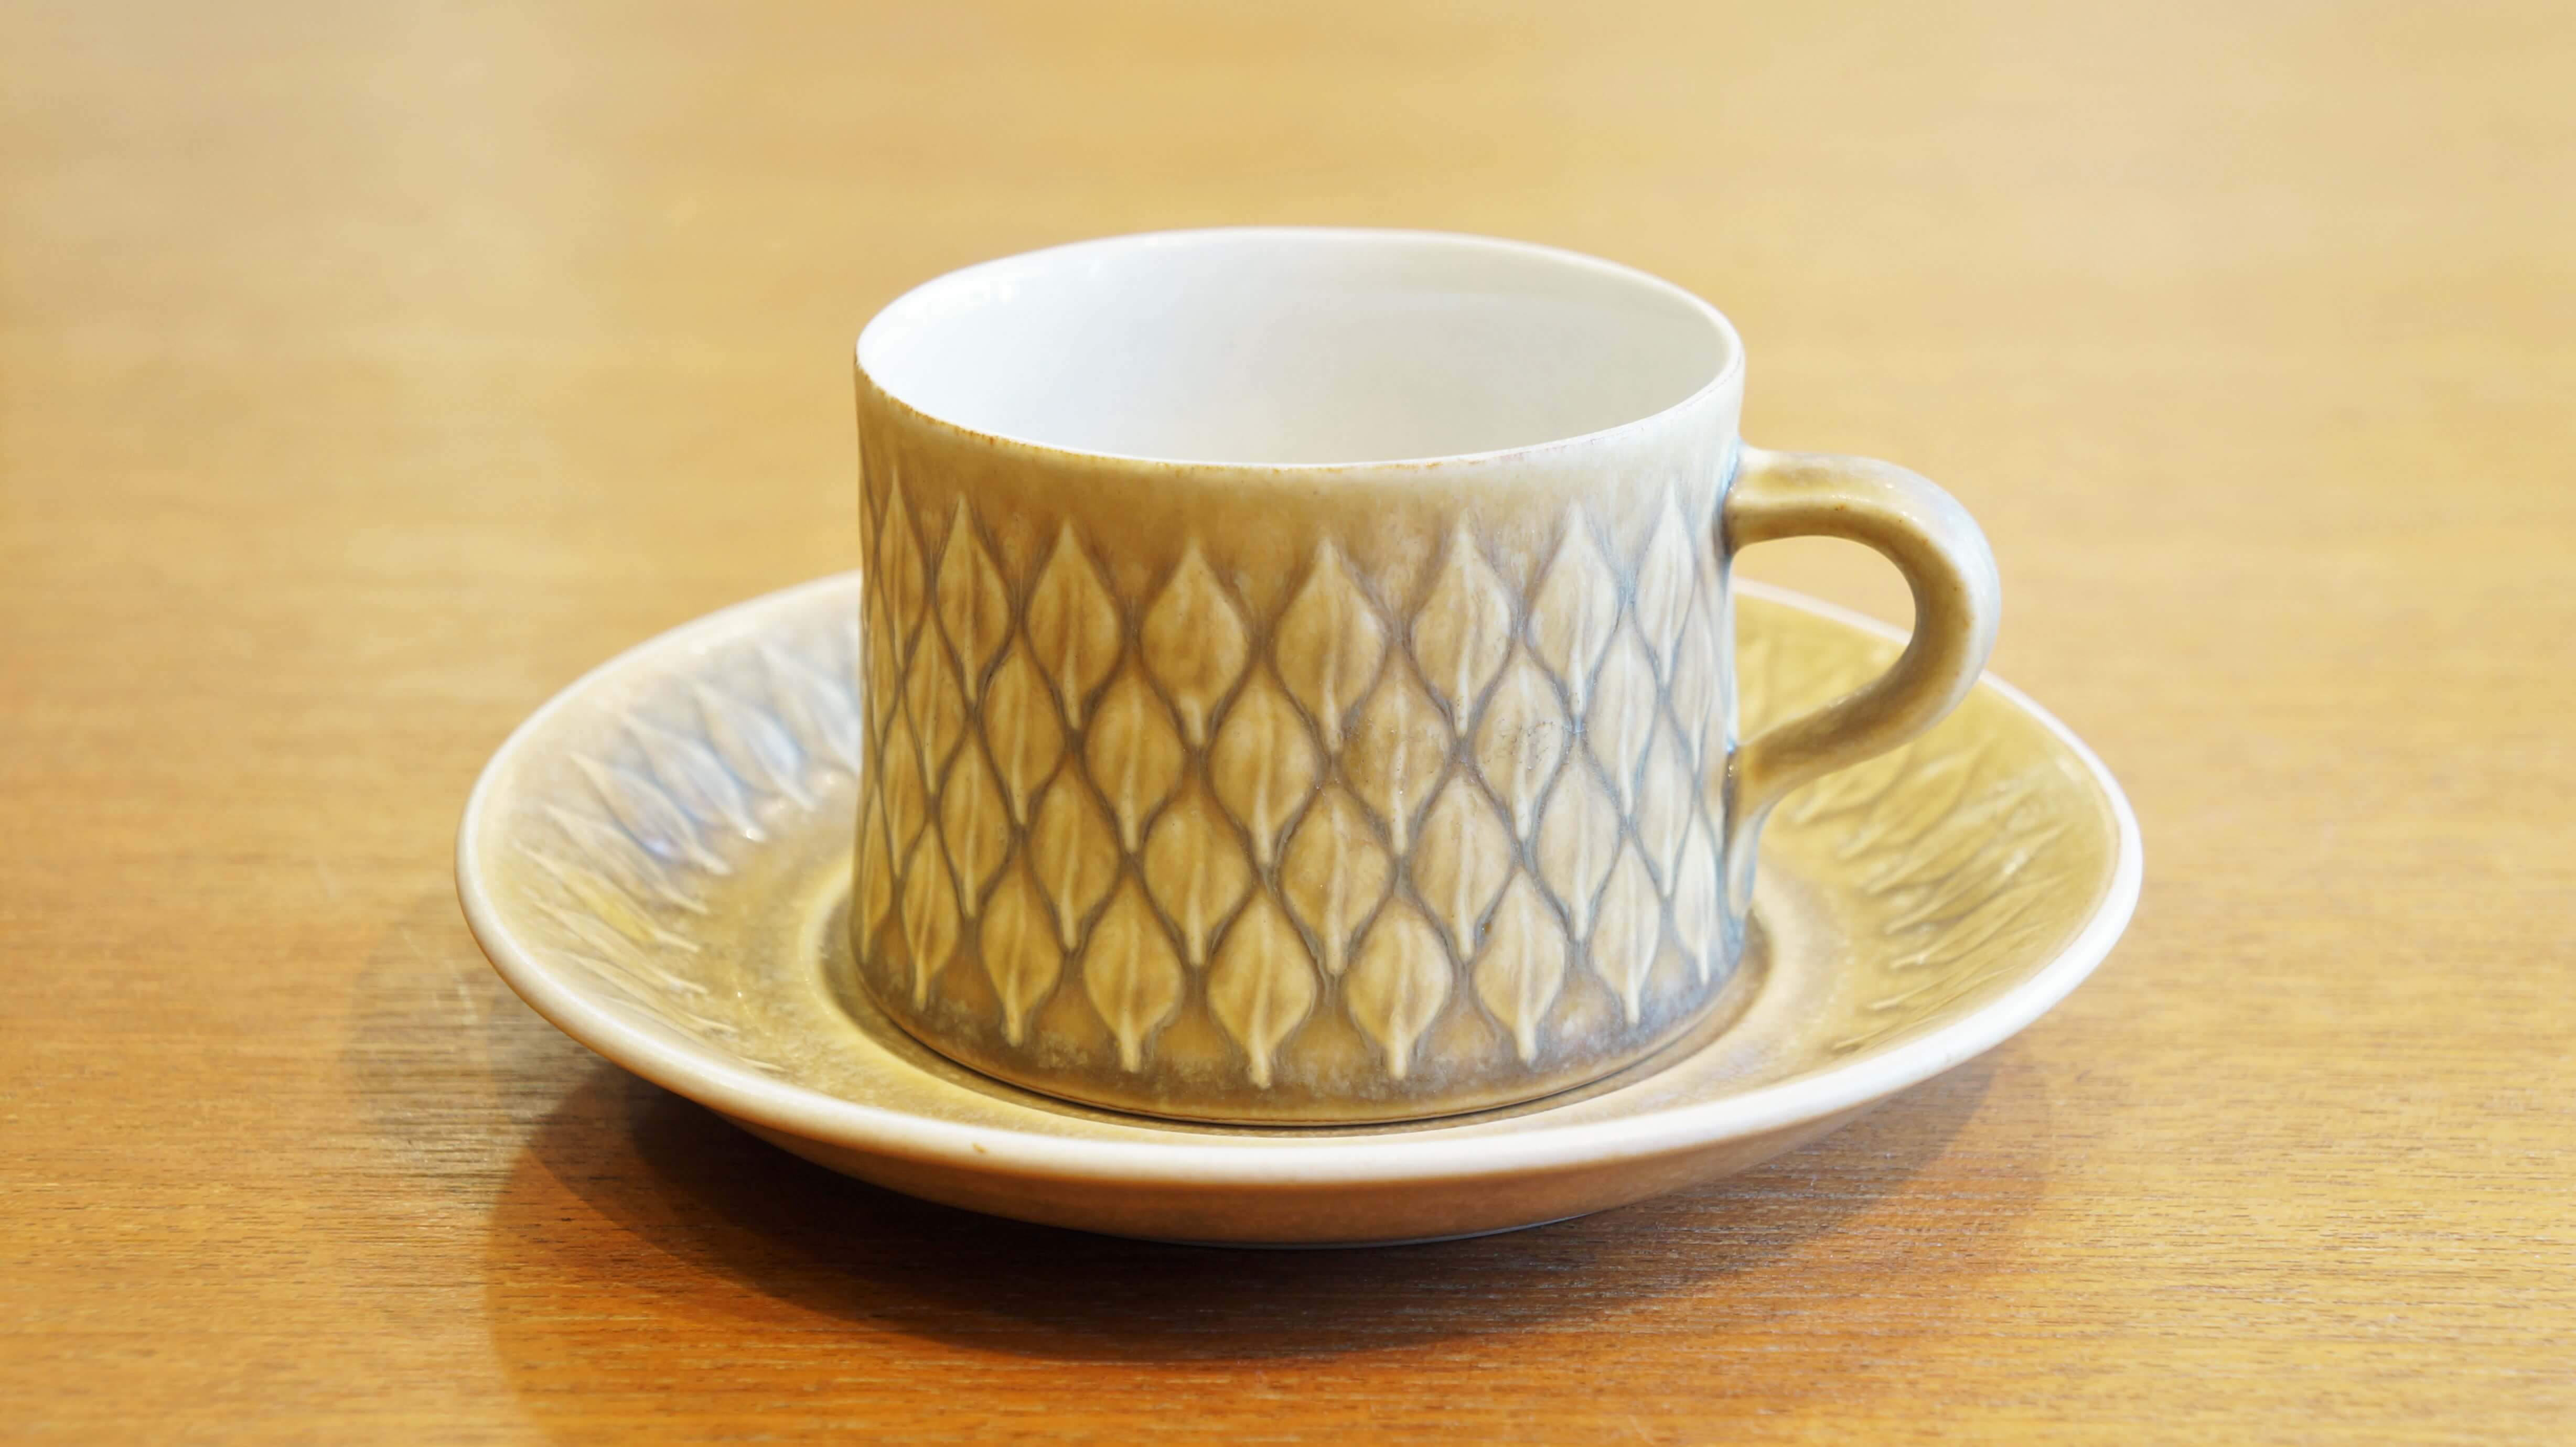 Kronjyden "relief" teacup＆saucer/クロニーデン "レリーフ" ティーカップ＆ソーサー